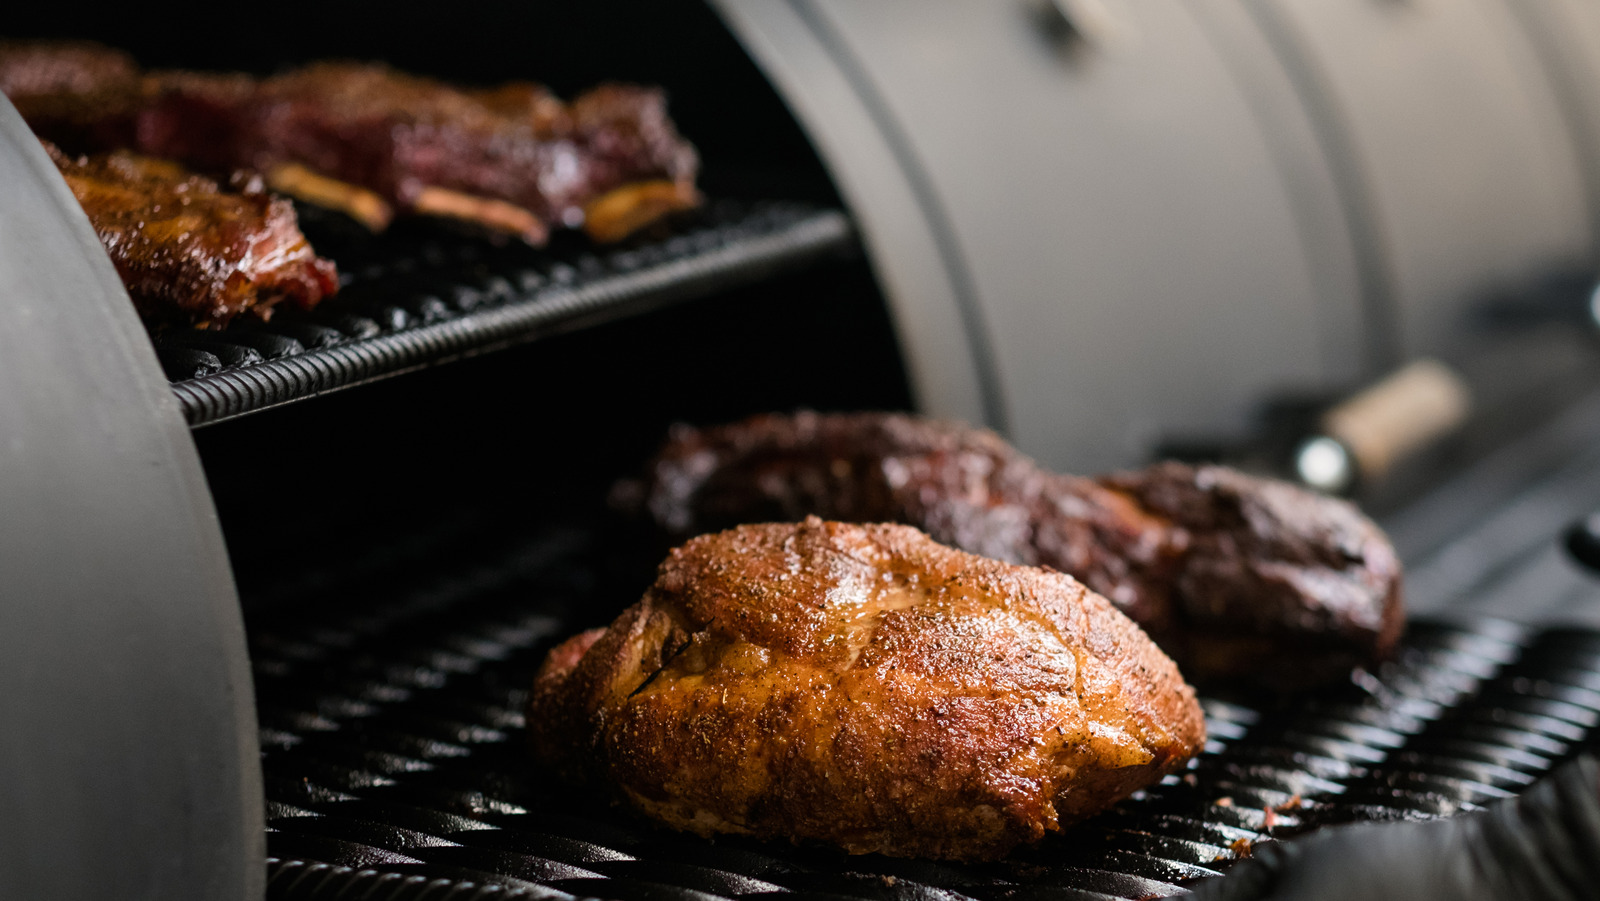 https://www.tastingtable.com/img/gallery/how-to-use-beer-to-elevate-smoked-meat/l-intro-1656097872.jpg